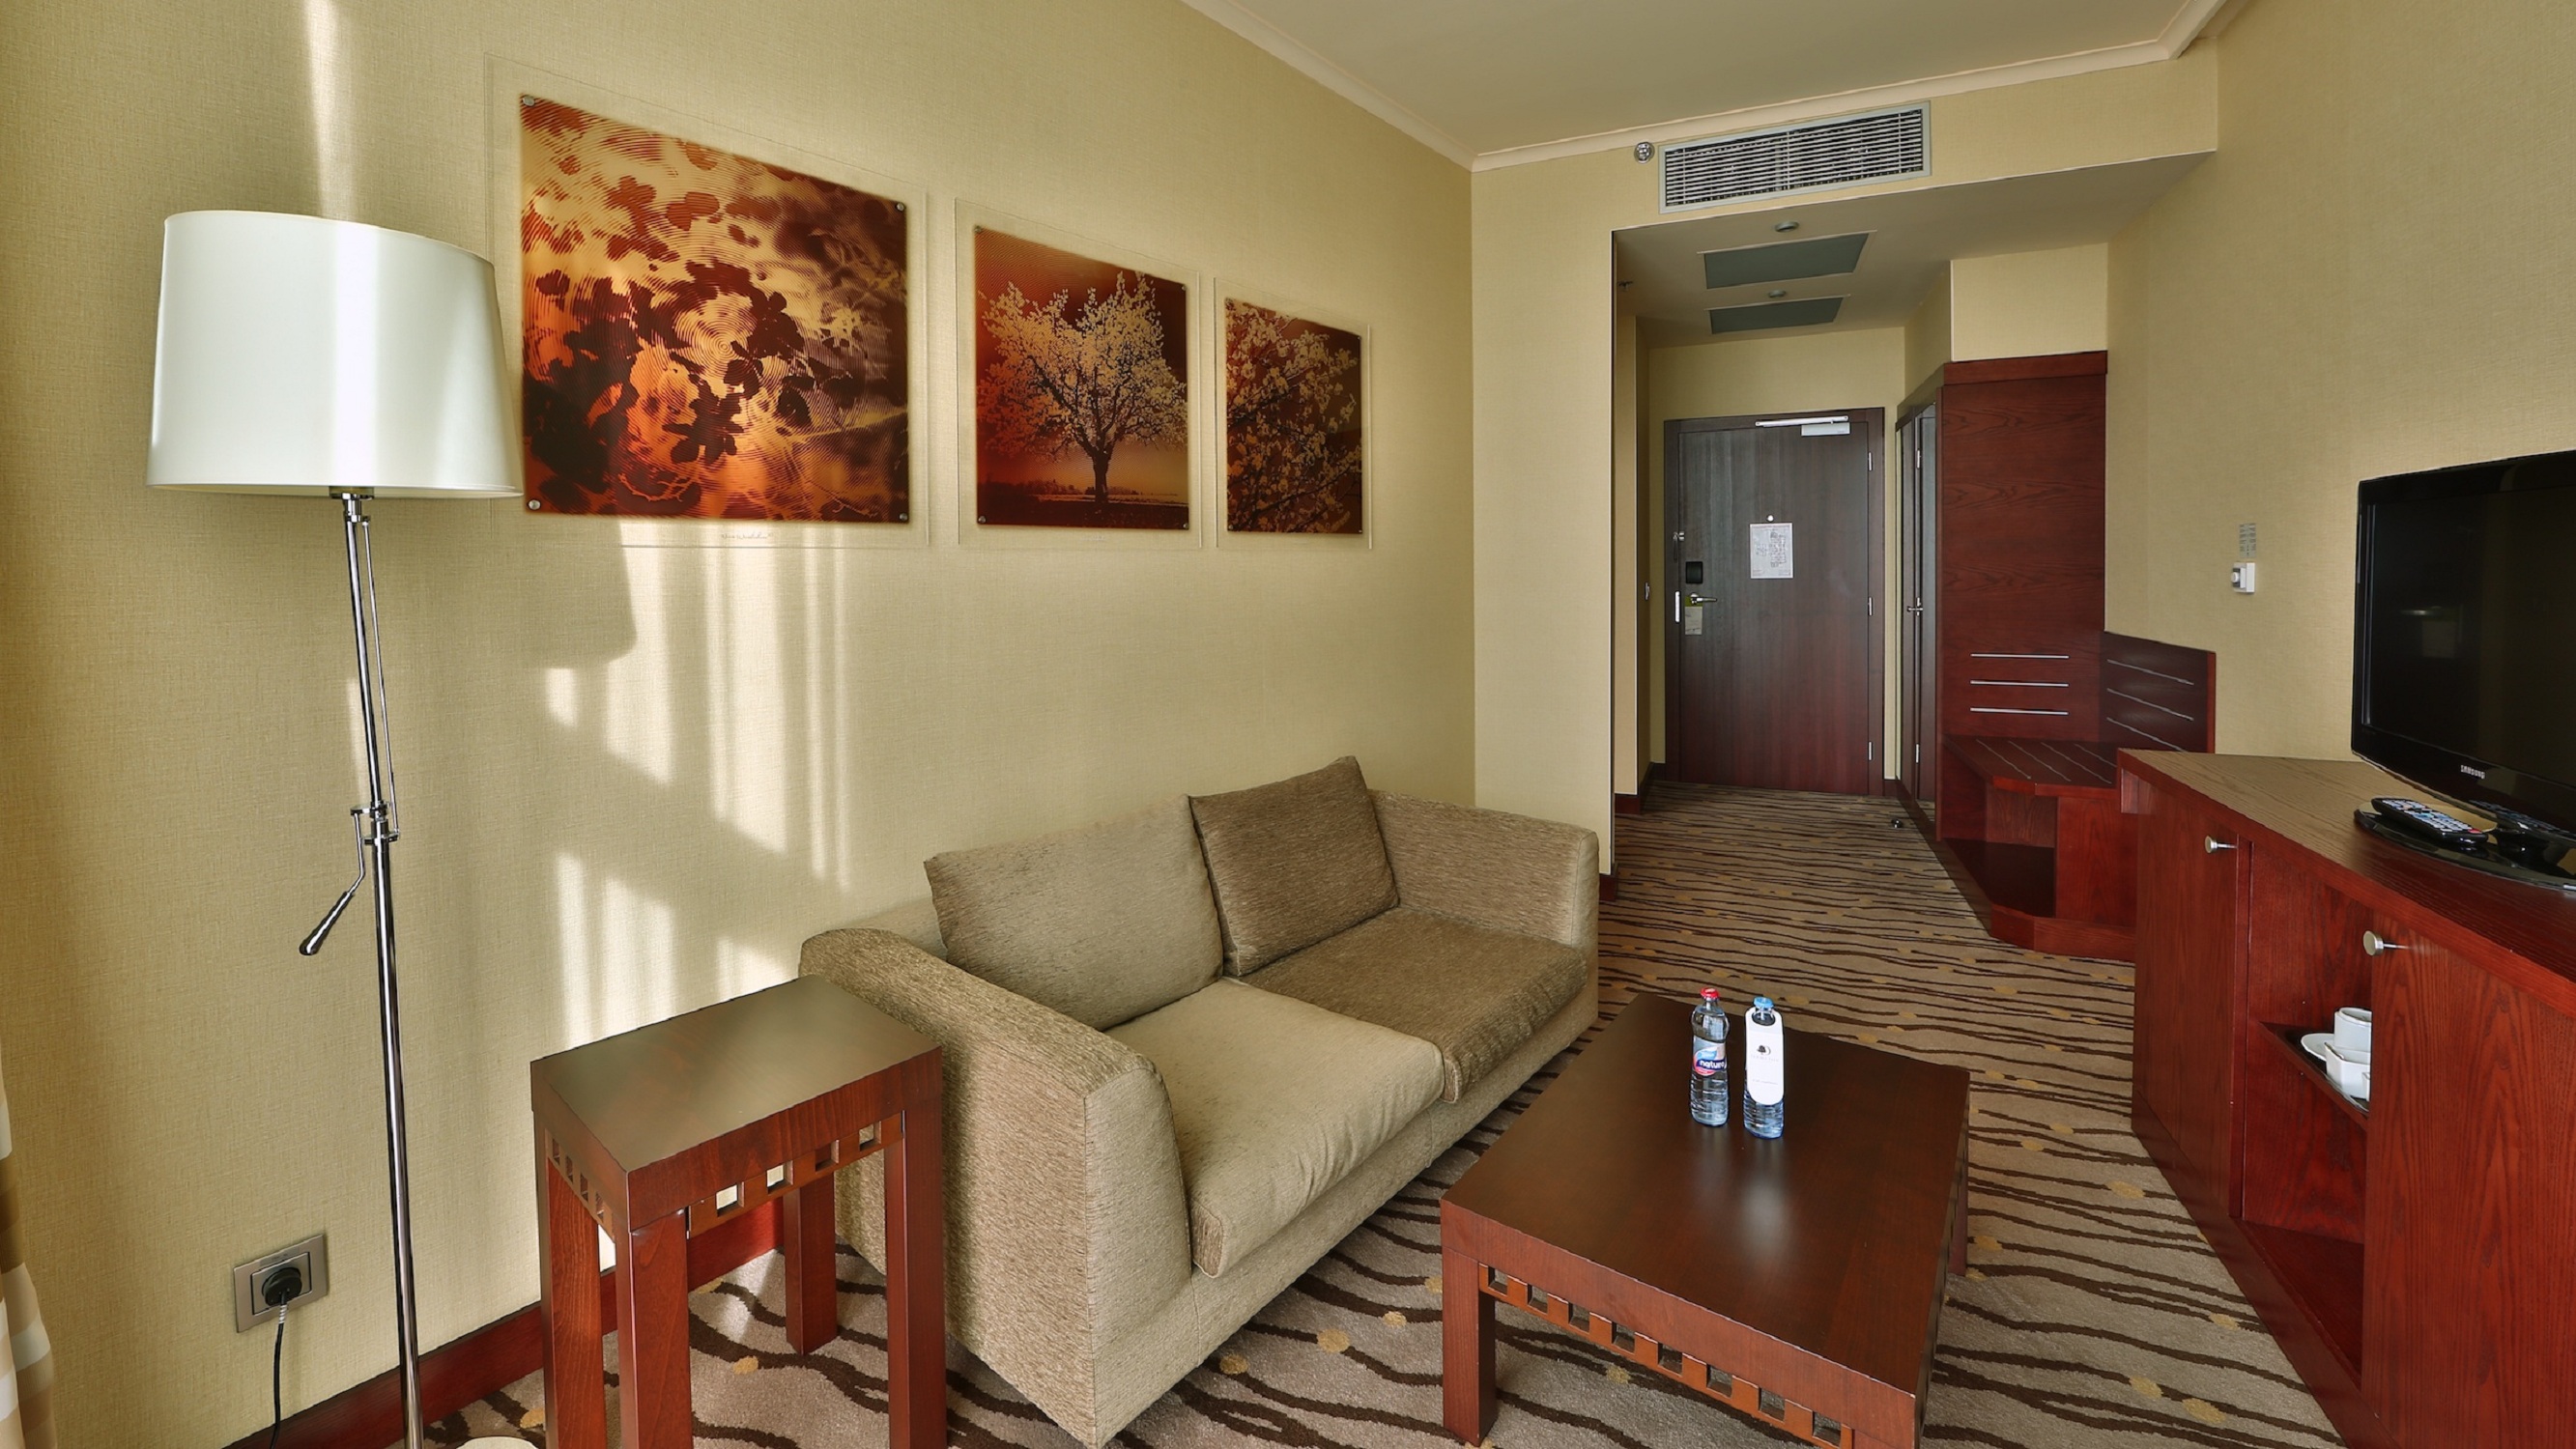 Entry, Hospitality Center, TV, Floor Lamp, Wall Art Above Sofa and Coffee Table in Suite Room